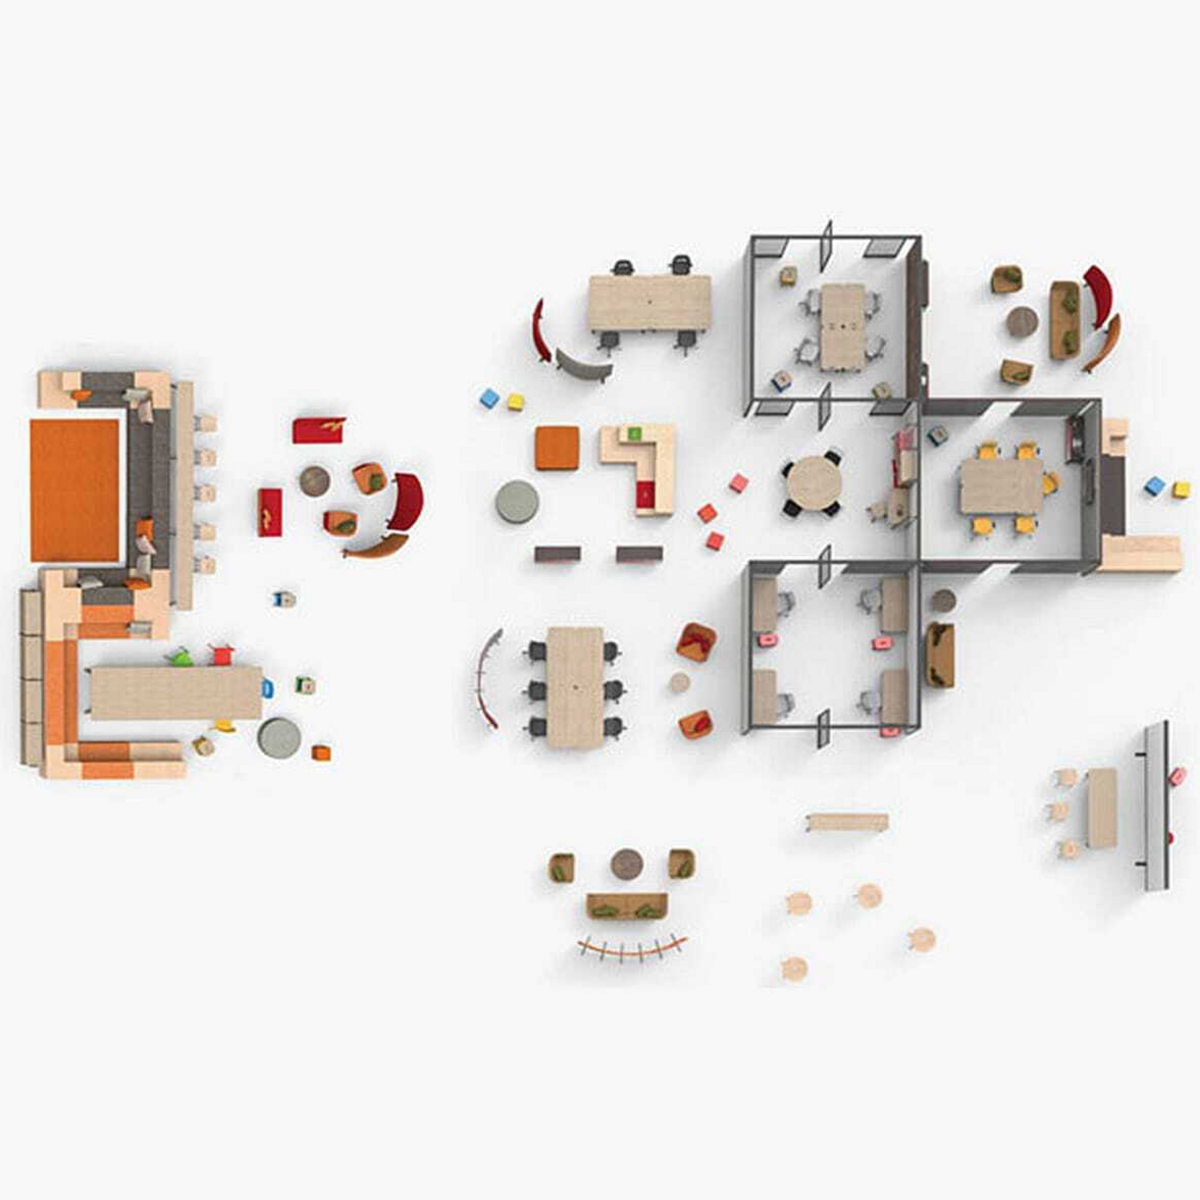 Knoll office layout.